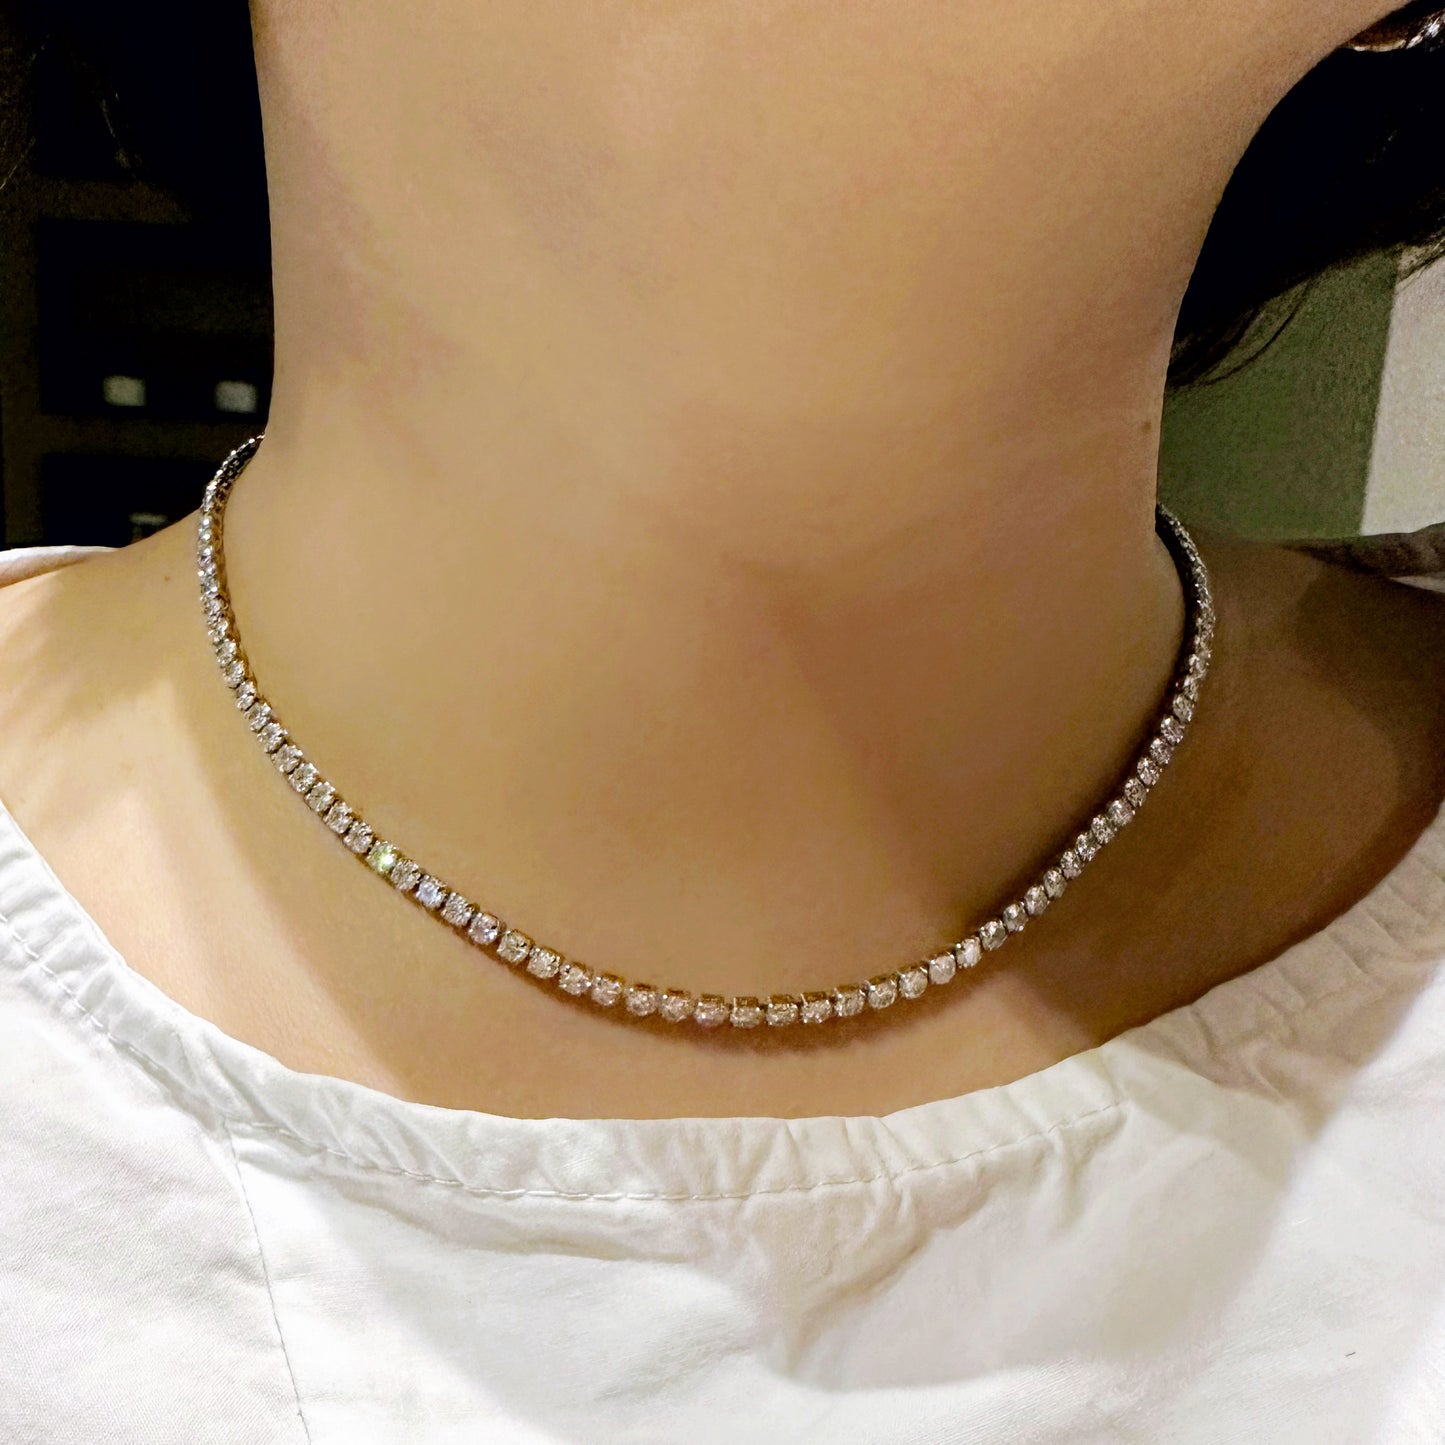 Classic Petite Tennis Necklace in Whitegold Tone